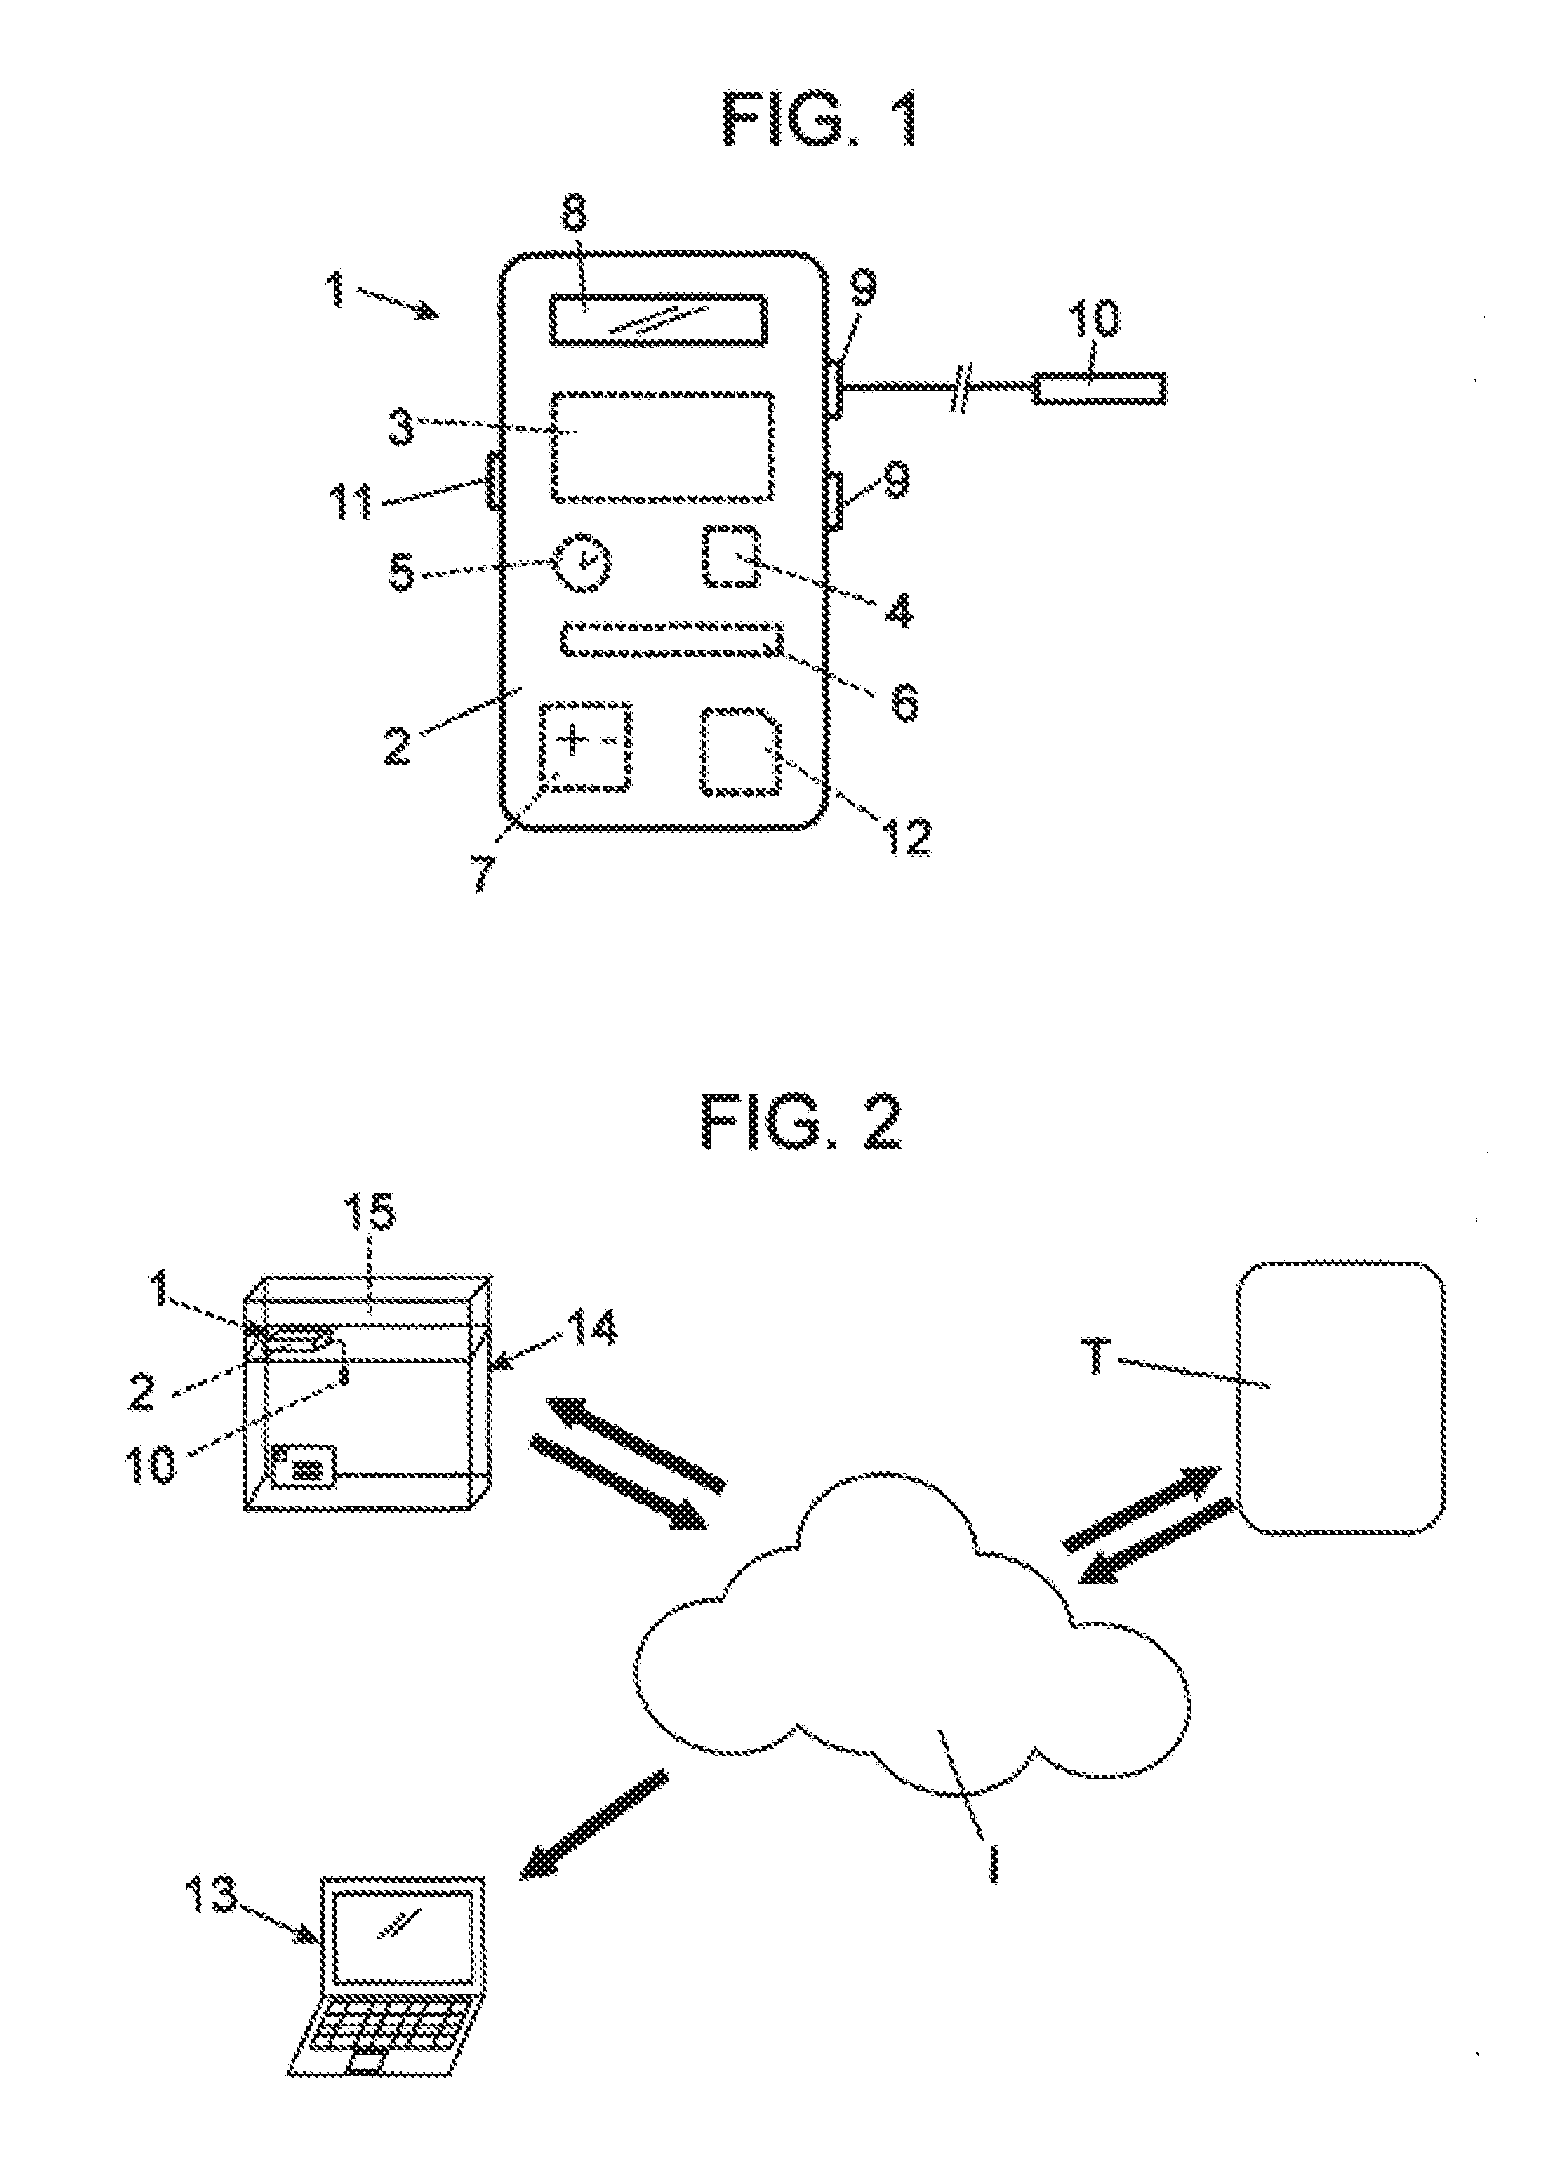 Data recorder system for monitoring and tracking in the dispatch and transportation of goods requiring specific values to be maintained and method for achieving said monitoring and tracking